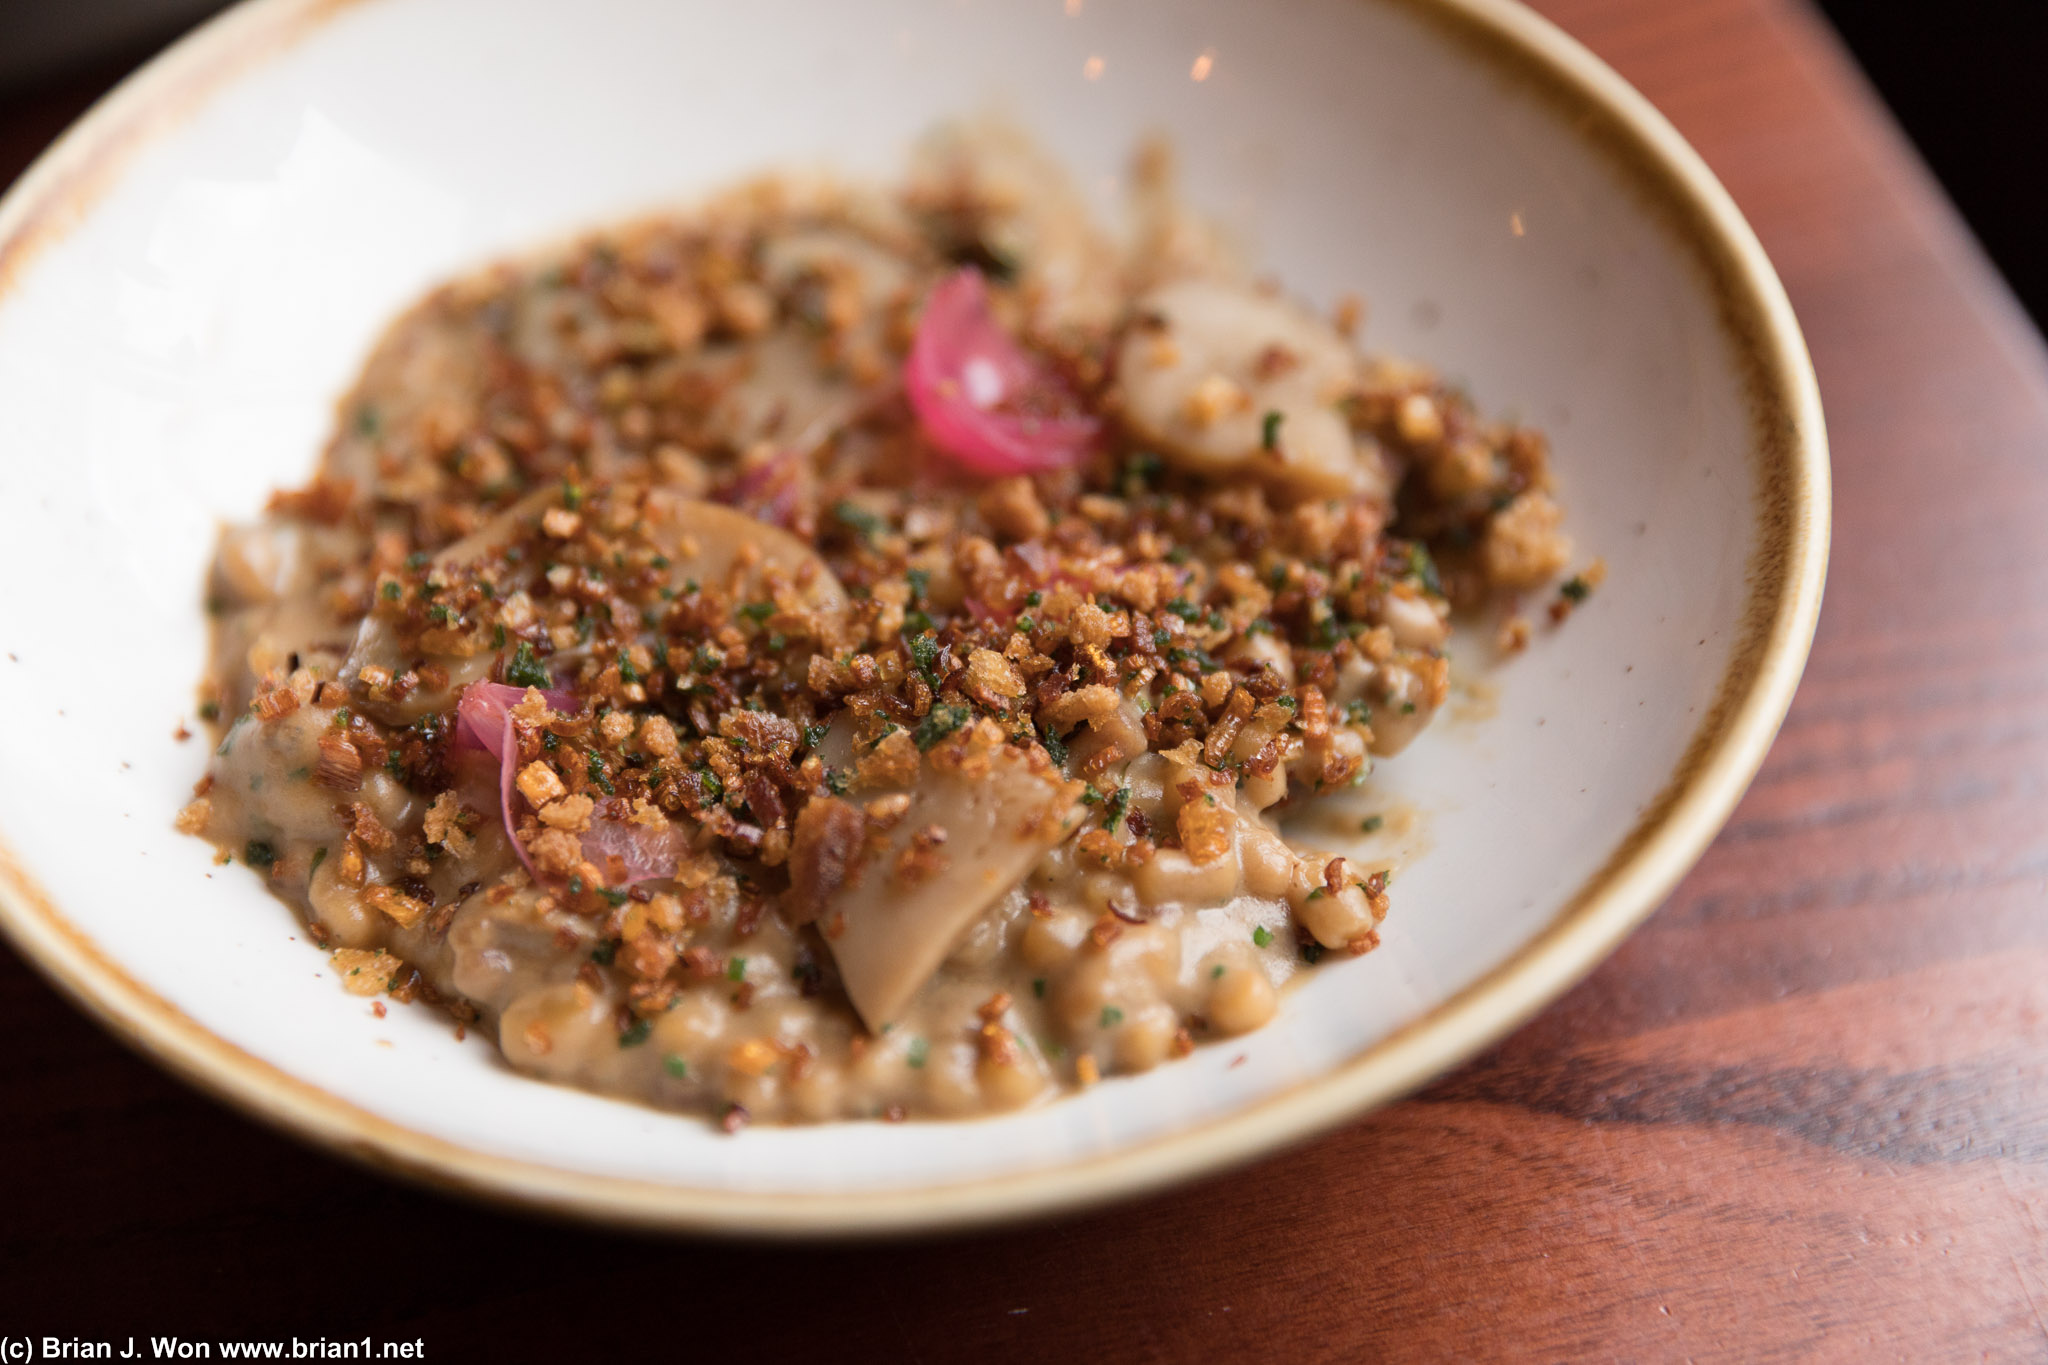 Ceps, fregola, and crispy challots? Quite different.